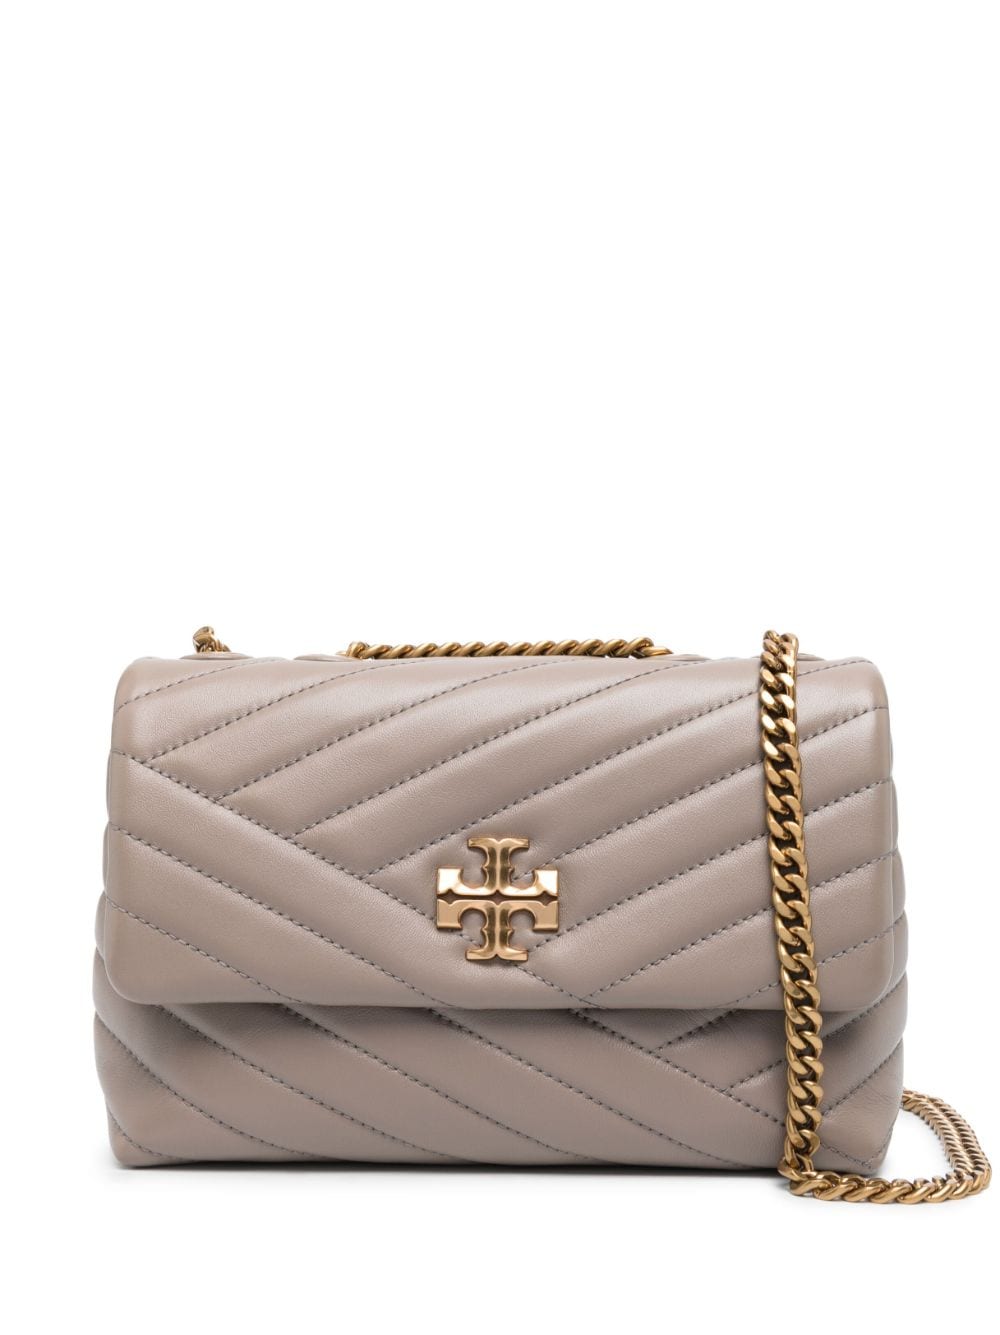 TORY BURCH Chevron Quilted Grey Nappa Leather Mini Shoulder Bag with Chain-Link Strap and Double T Motif